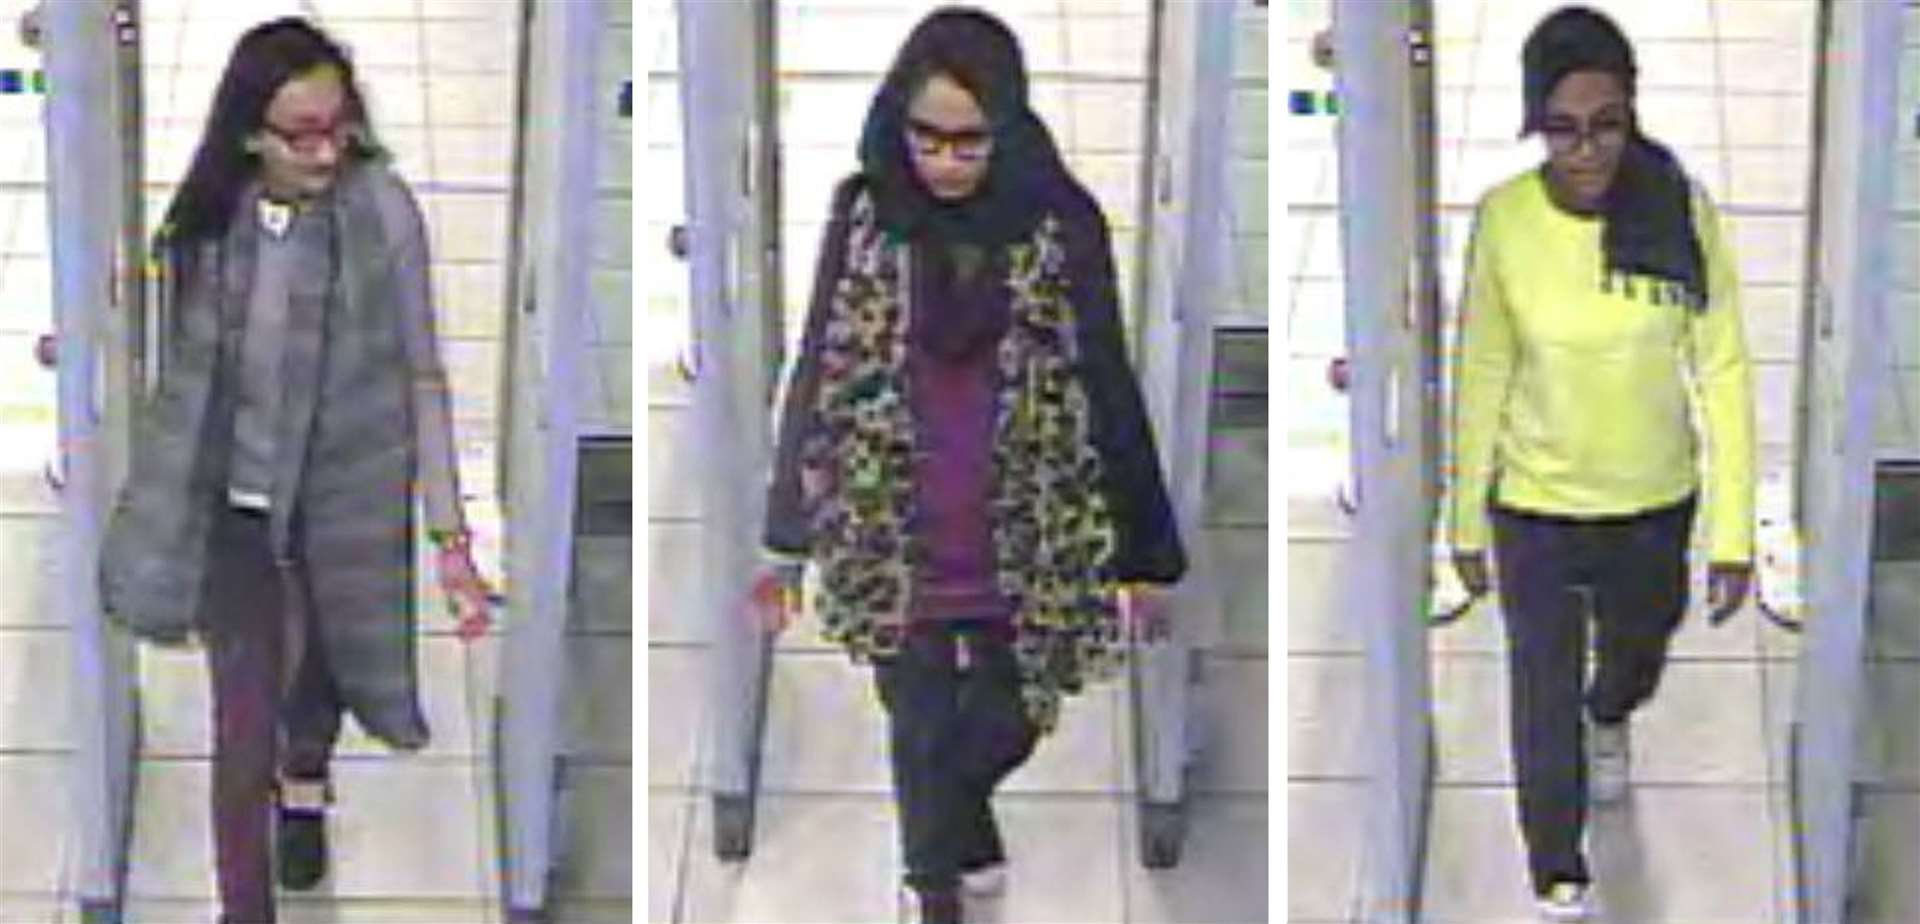 Kadiza Sultana, Shamima Begum and Amira Abase pictured as they fled to Syria (Metropolitan Police/PA)